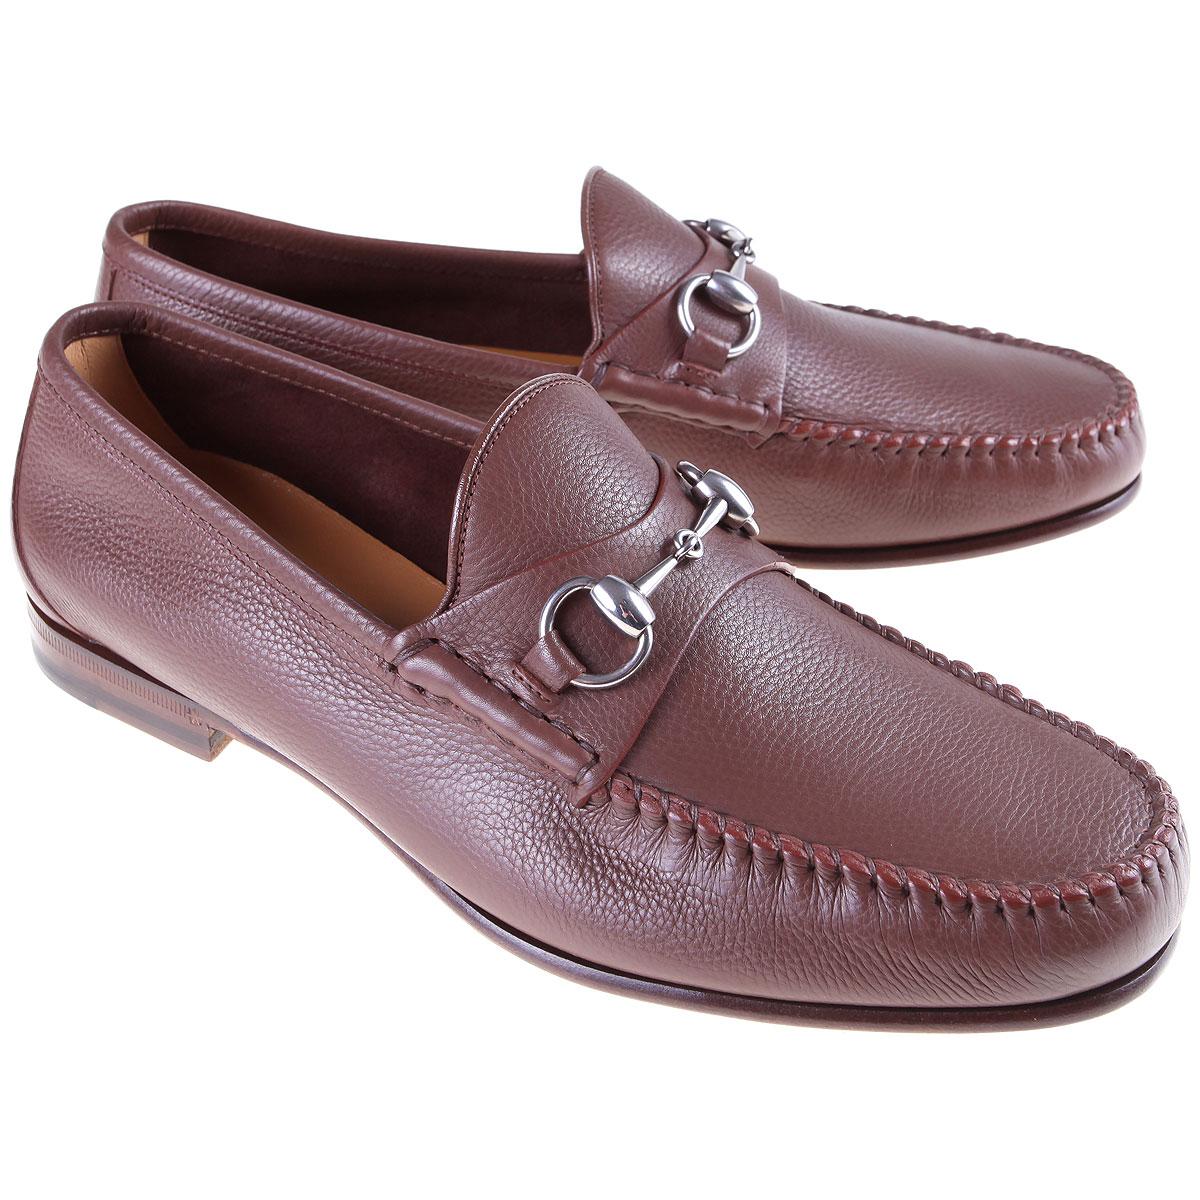 Gucci Loafers For Men On Sale In Outlet in Brown for Men - Lyst